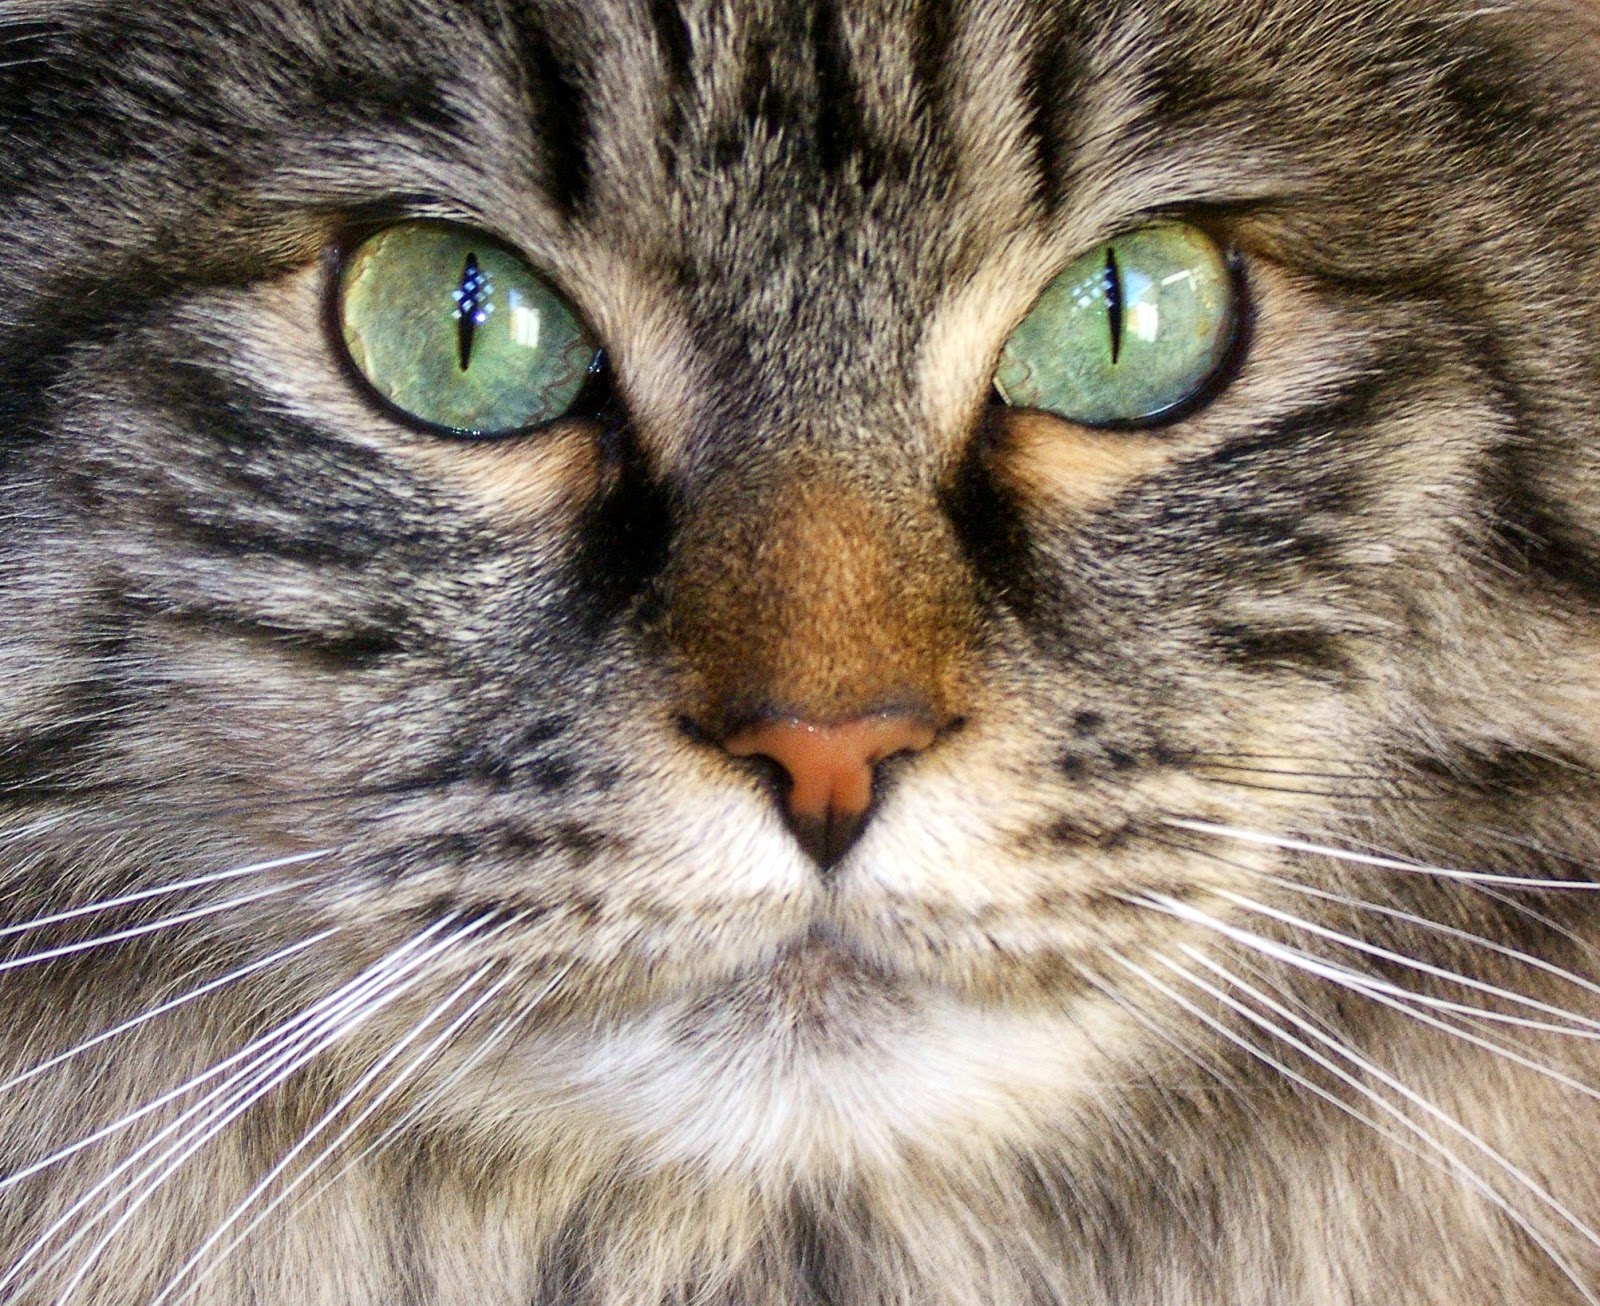 Can A Cat's Eyes Change Color? Find Out More About Your Cat's Eyes